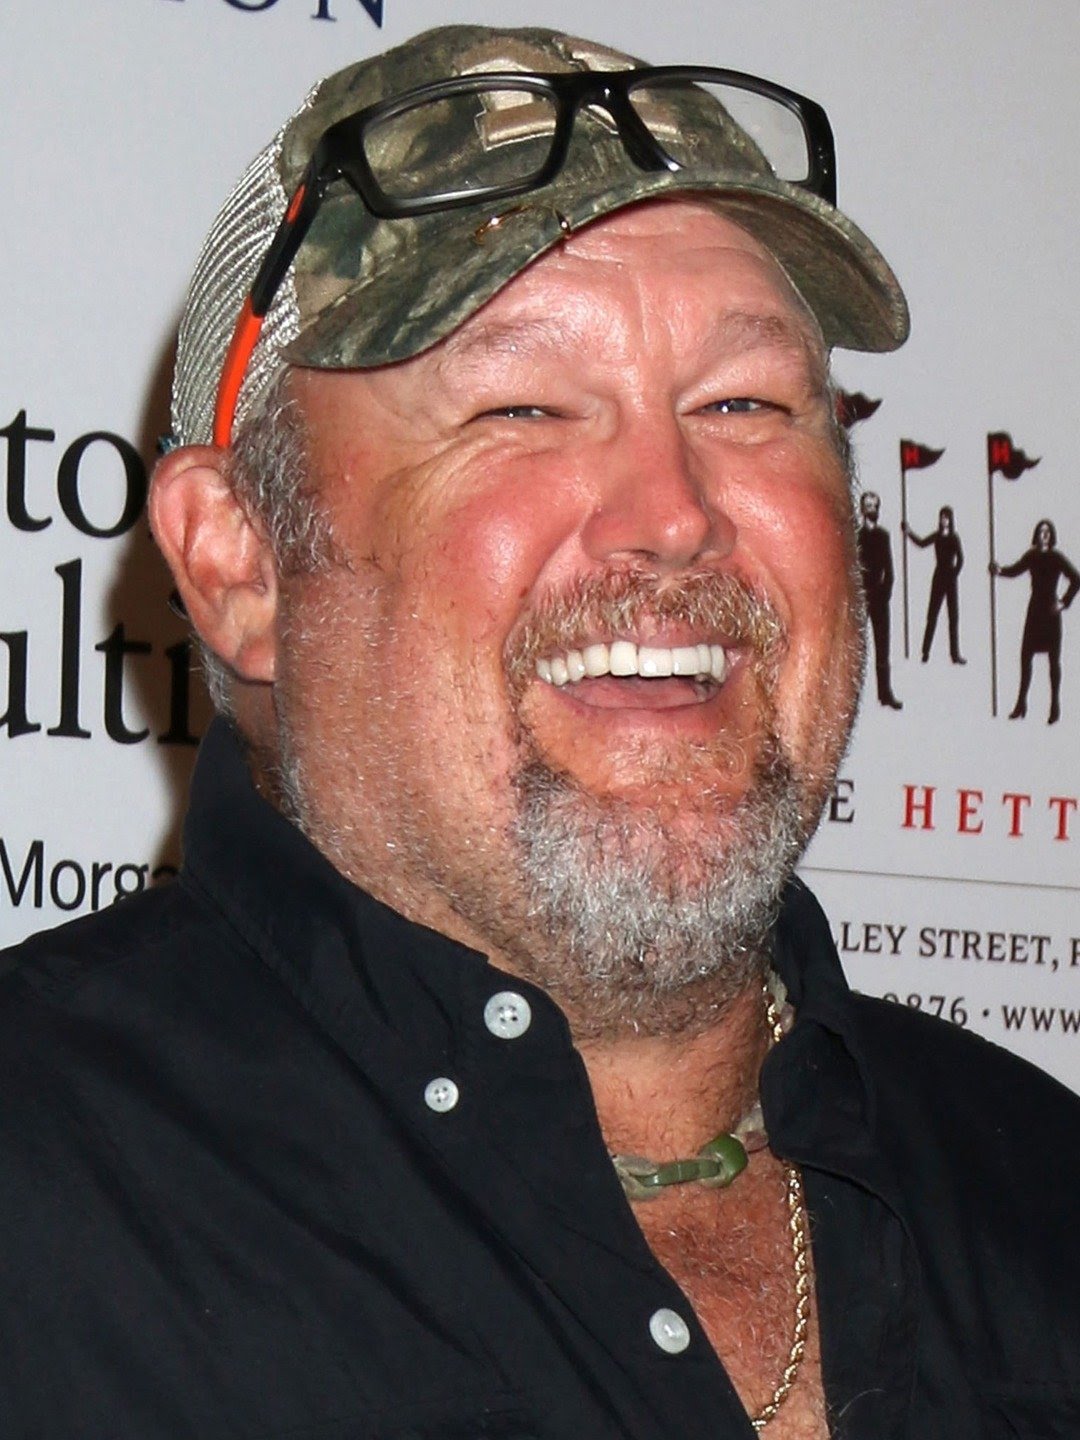 The 60-year old son of father Tom Whitney and mother  Shirley Whitney Larry the Cable Guy in 2023 photo. Larry the Cable Guy earned a  million dollar salary - leaving the net worth at 80 million in 2023